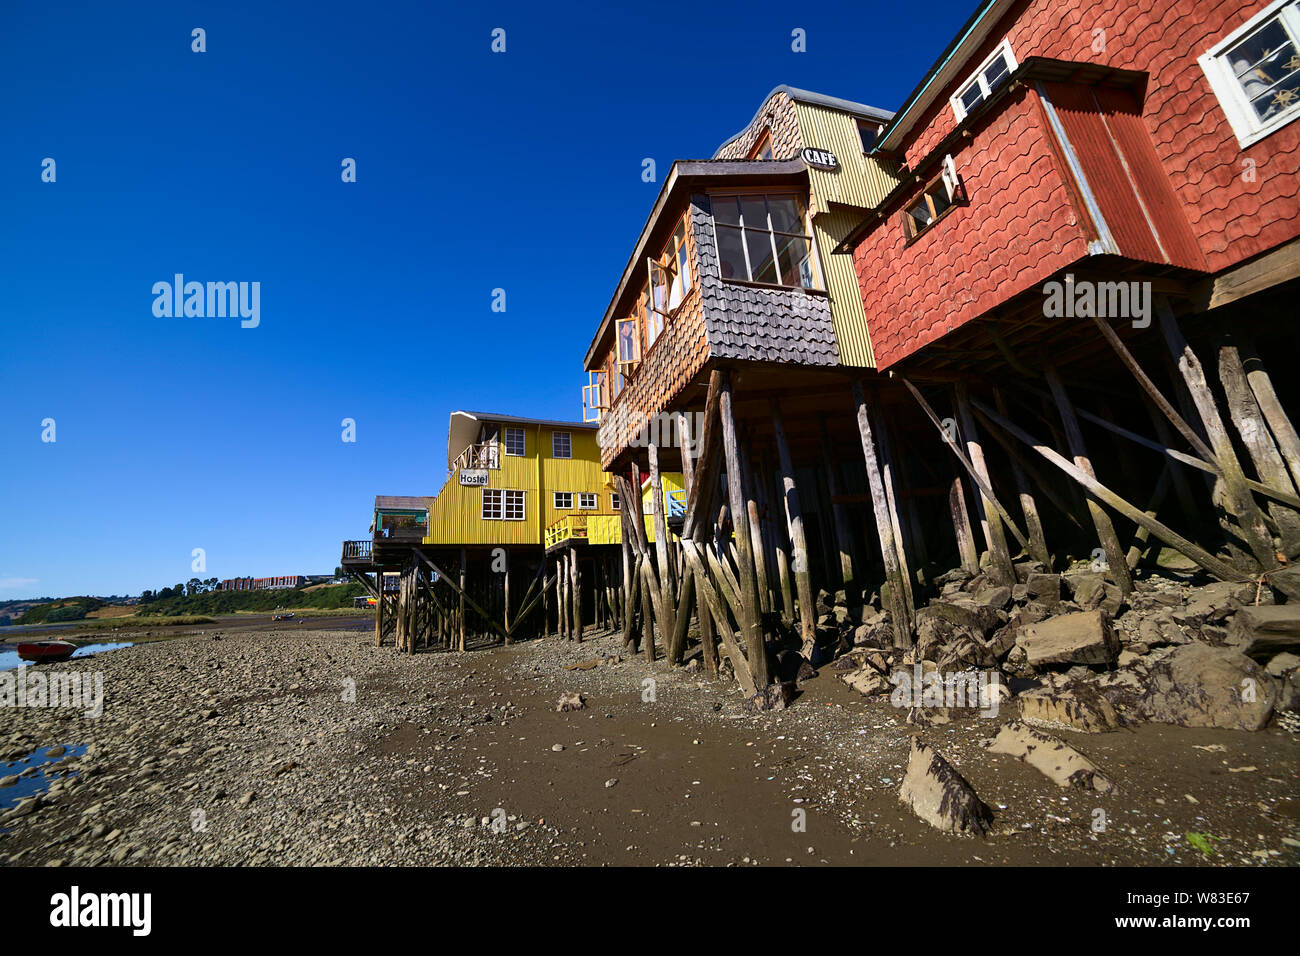 CASTRO, CHILE - FEBRUARY 6, 2016: Palafitos, traditional wooden stilt houses at low tide along the Gamboa River in Castro, Chiloe Archipelago, Chile Stock Photo